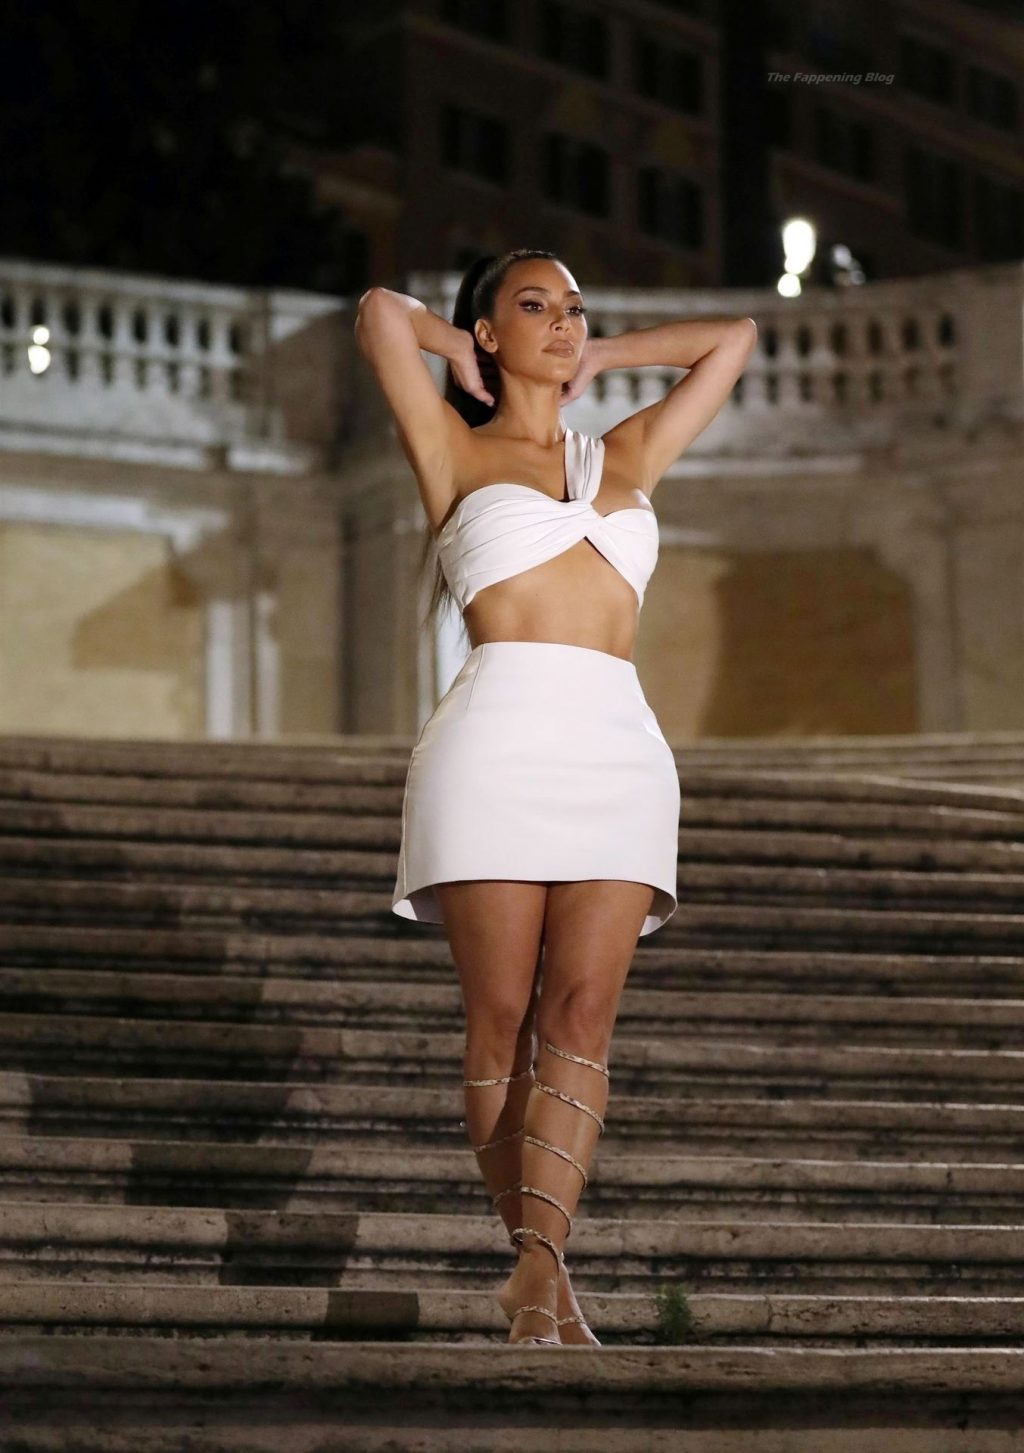 Kim Kardashian Stops By the Famous Spanish Steps to Take Pics in Rome (25 Photos)